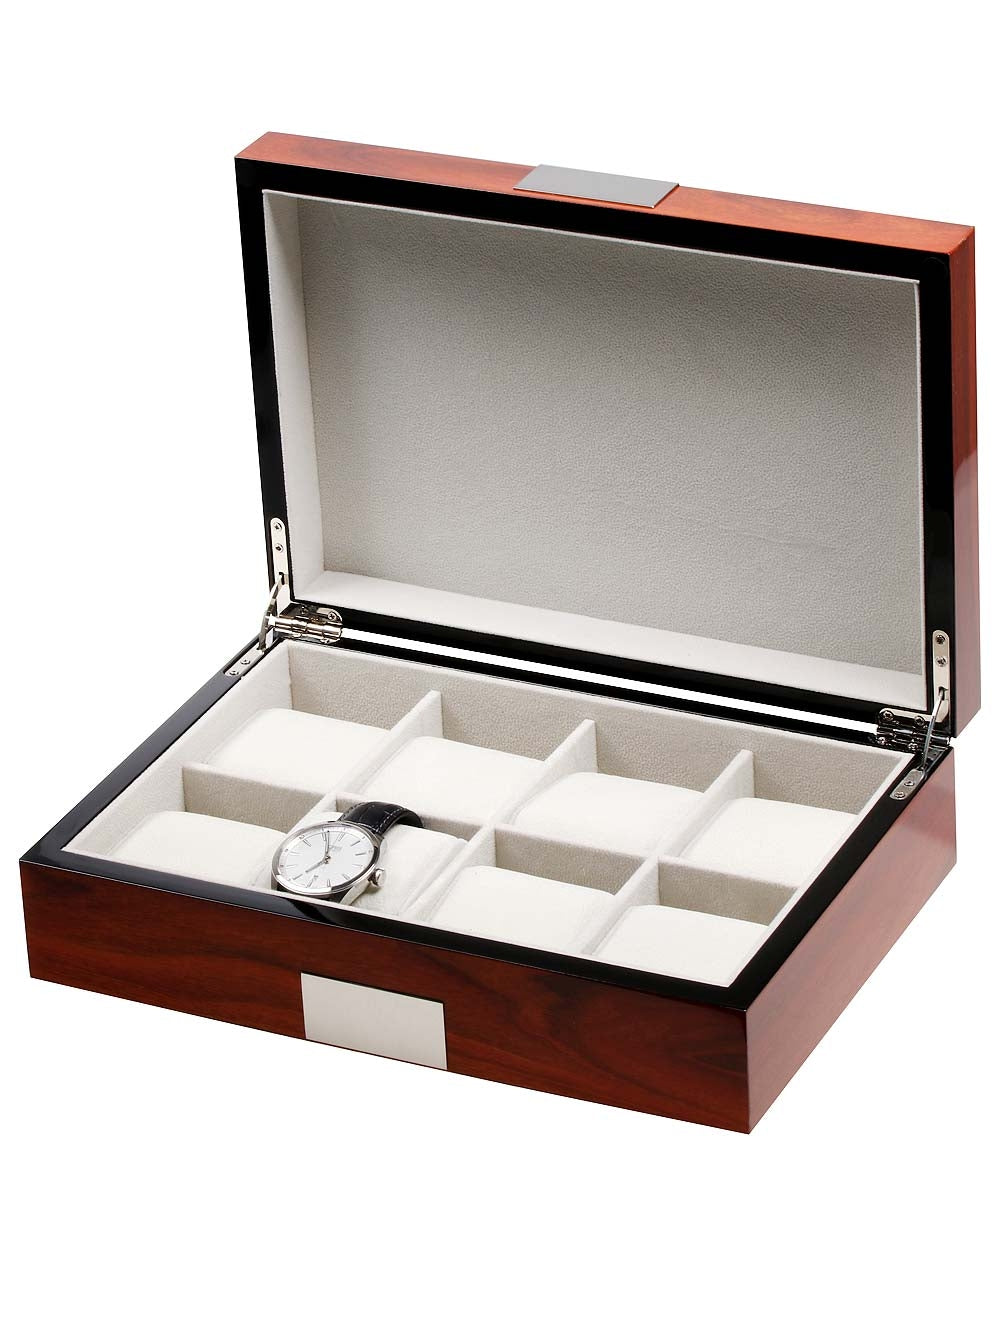 Rothschild watch box RS-2022-8RO rosewood for 8 watches